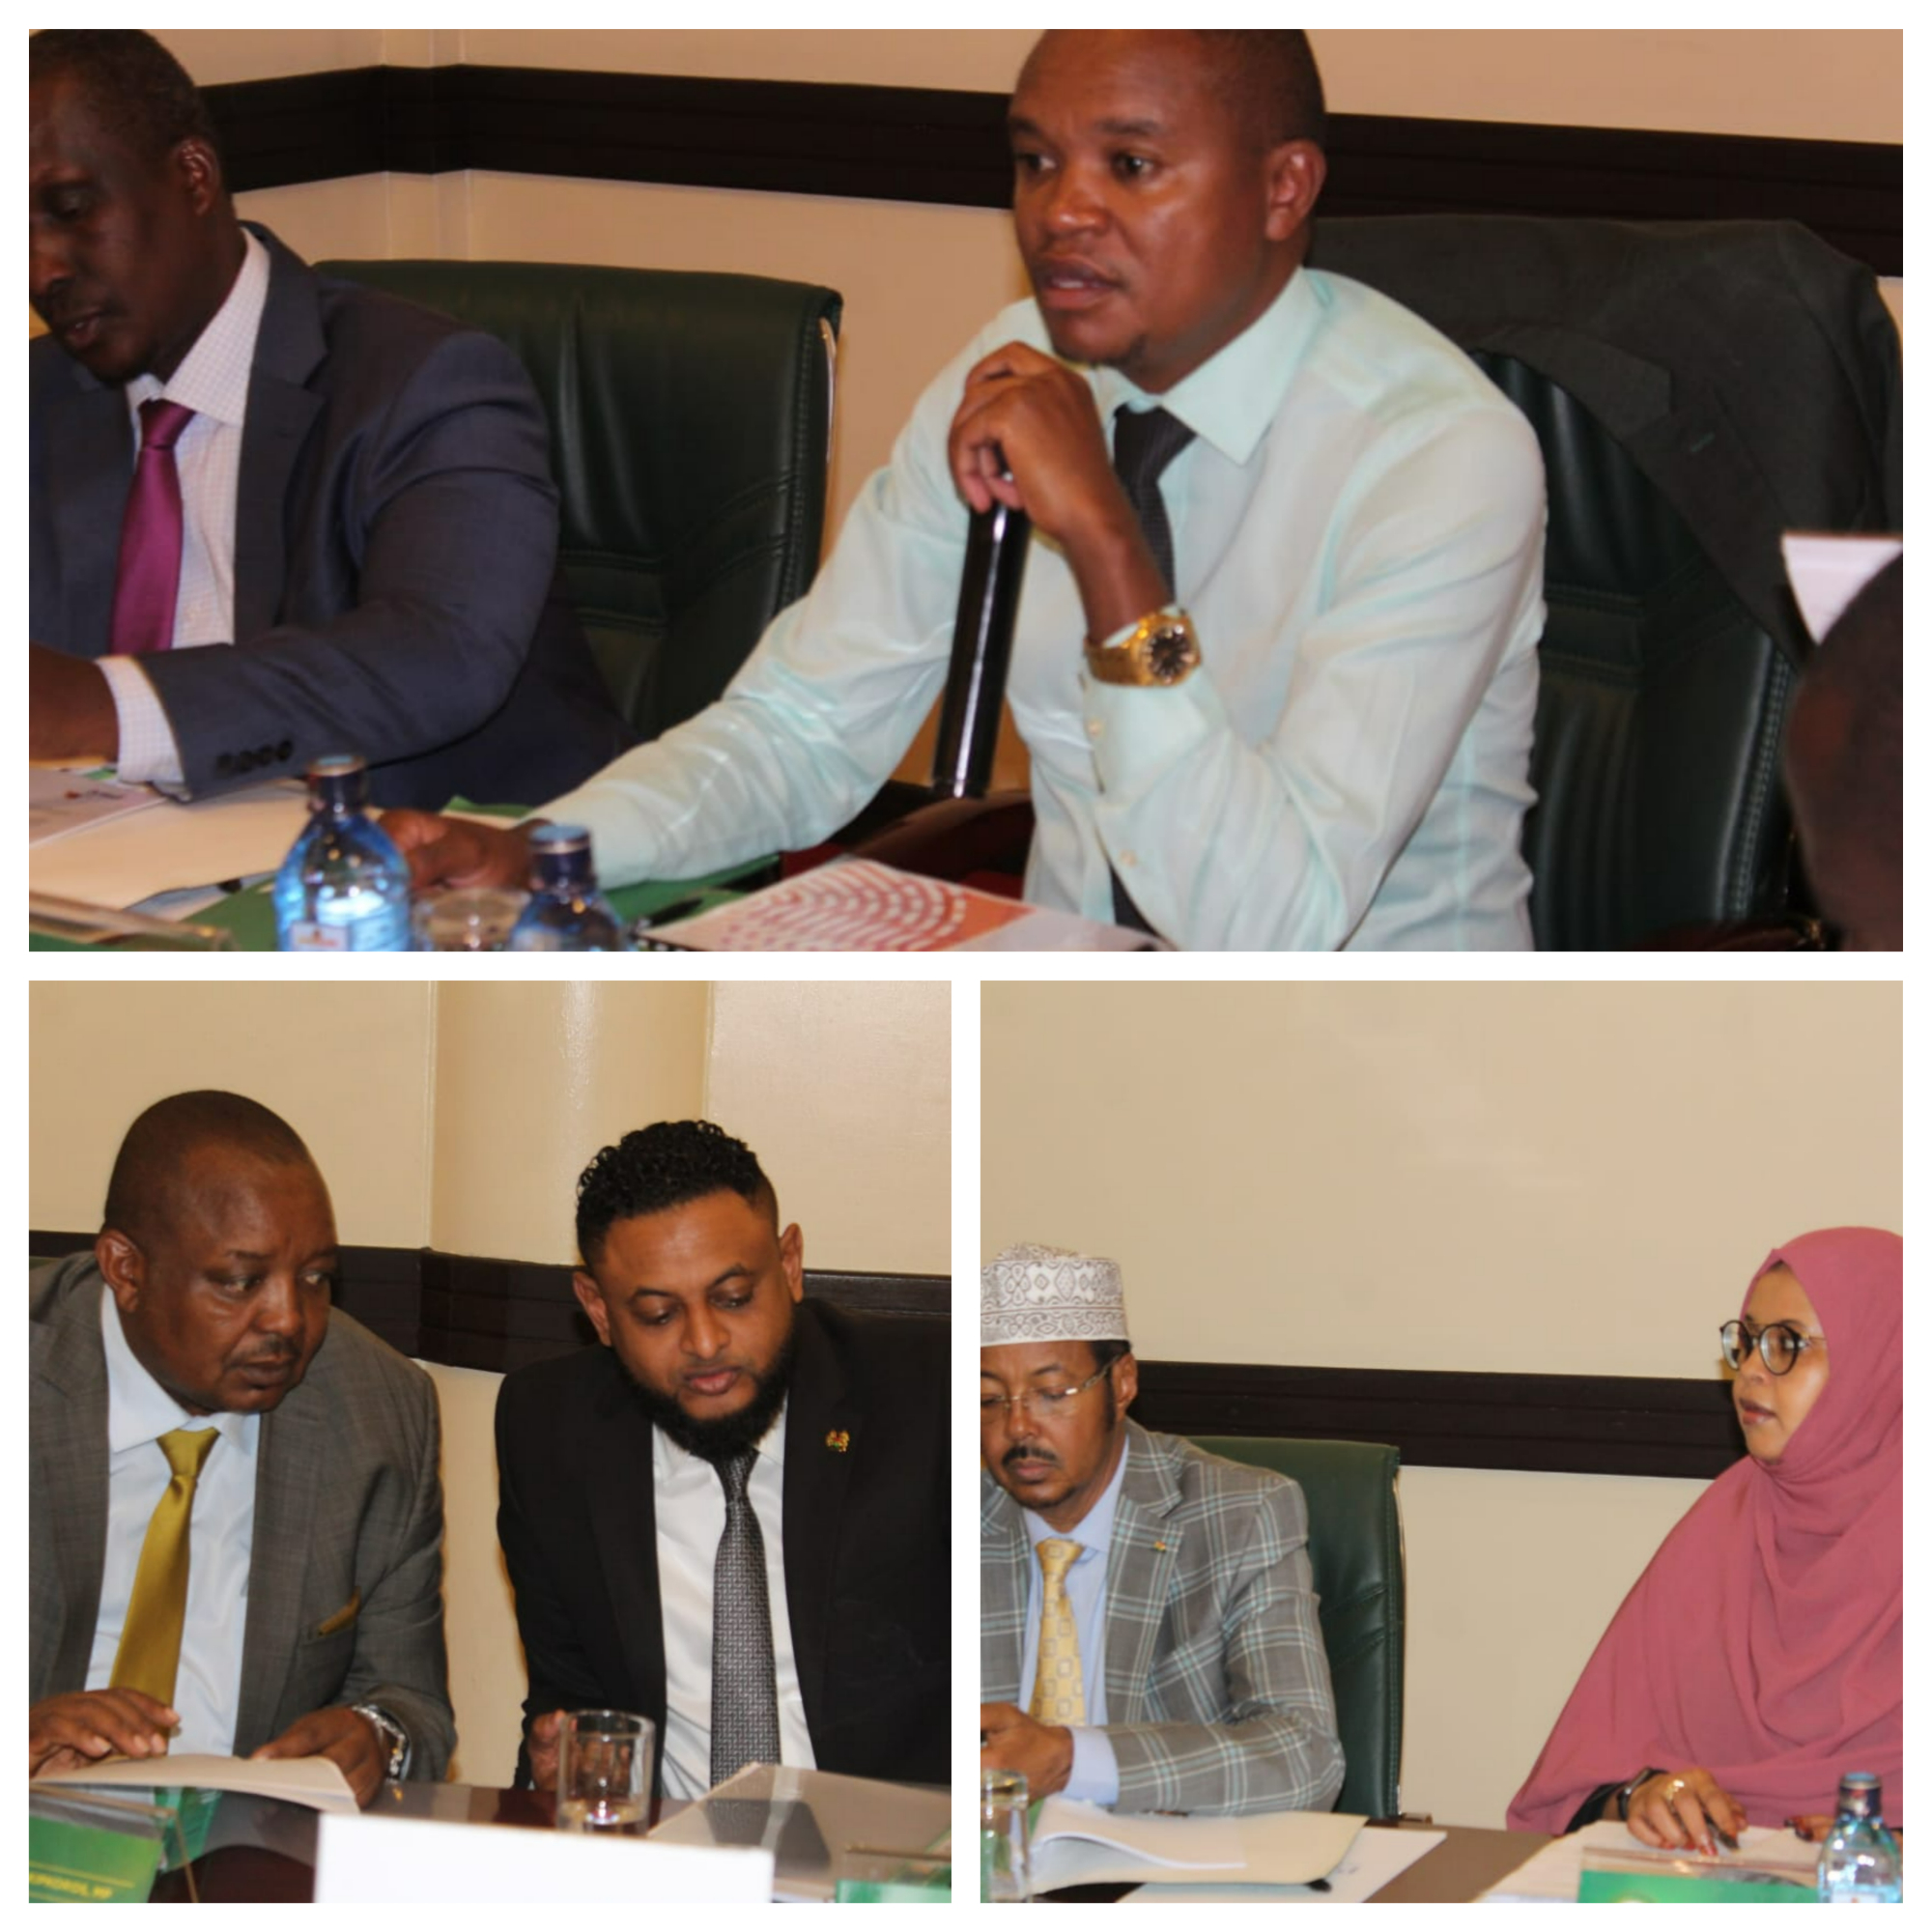 NATIONAL ASSEMBLY FINANCE AND NATIONAL PLANNING COMMITTEE CONDUCTS PUBLIC HEARINGS ON STATUTES MISCELLANEOUS AND EQUALIZATION BILLS